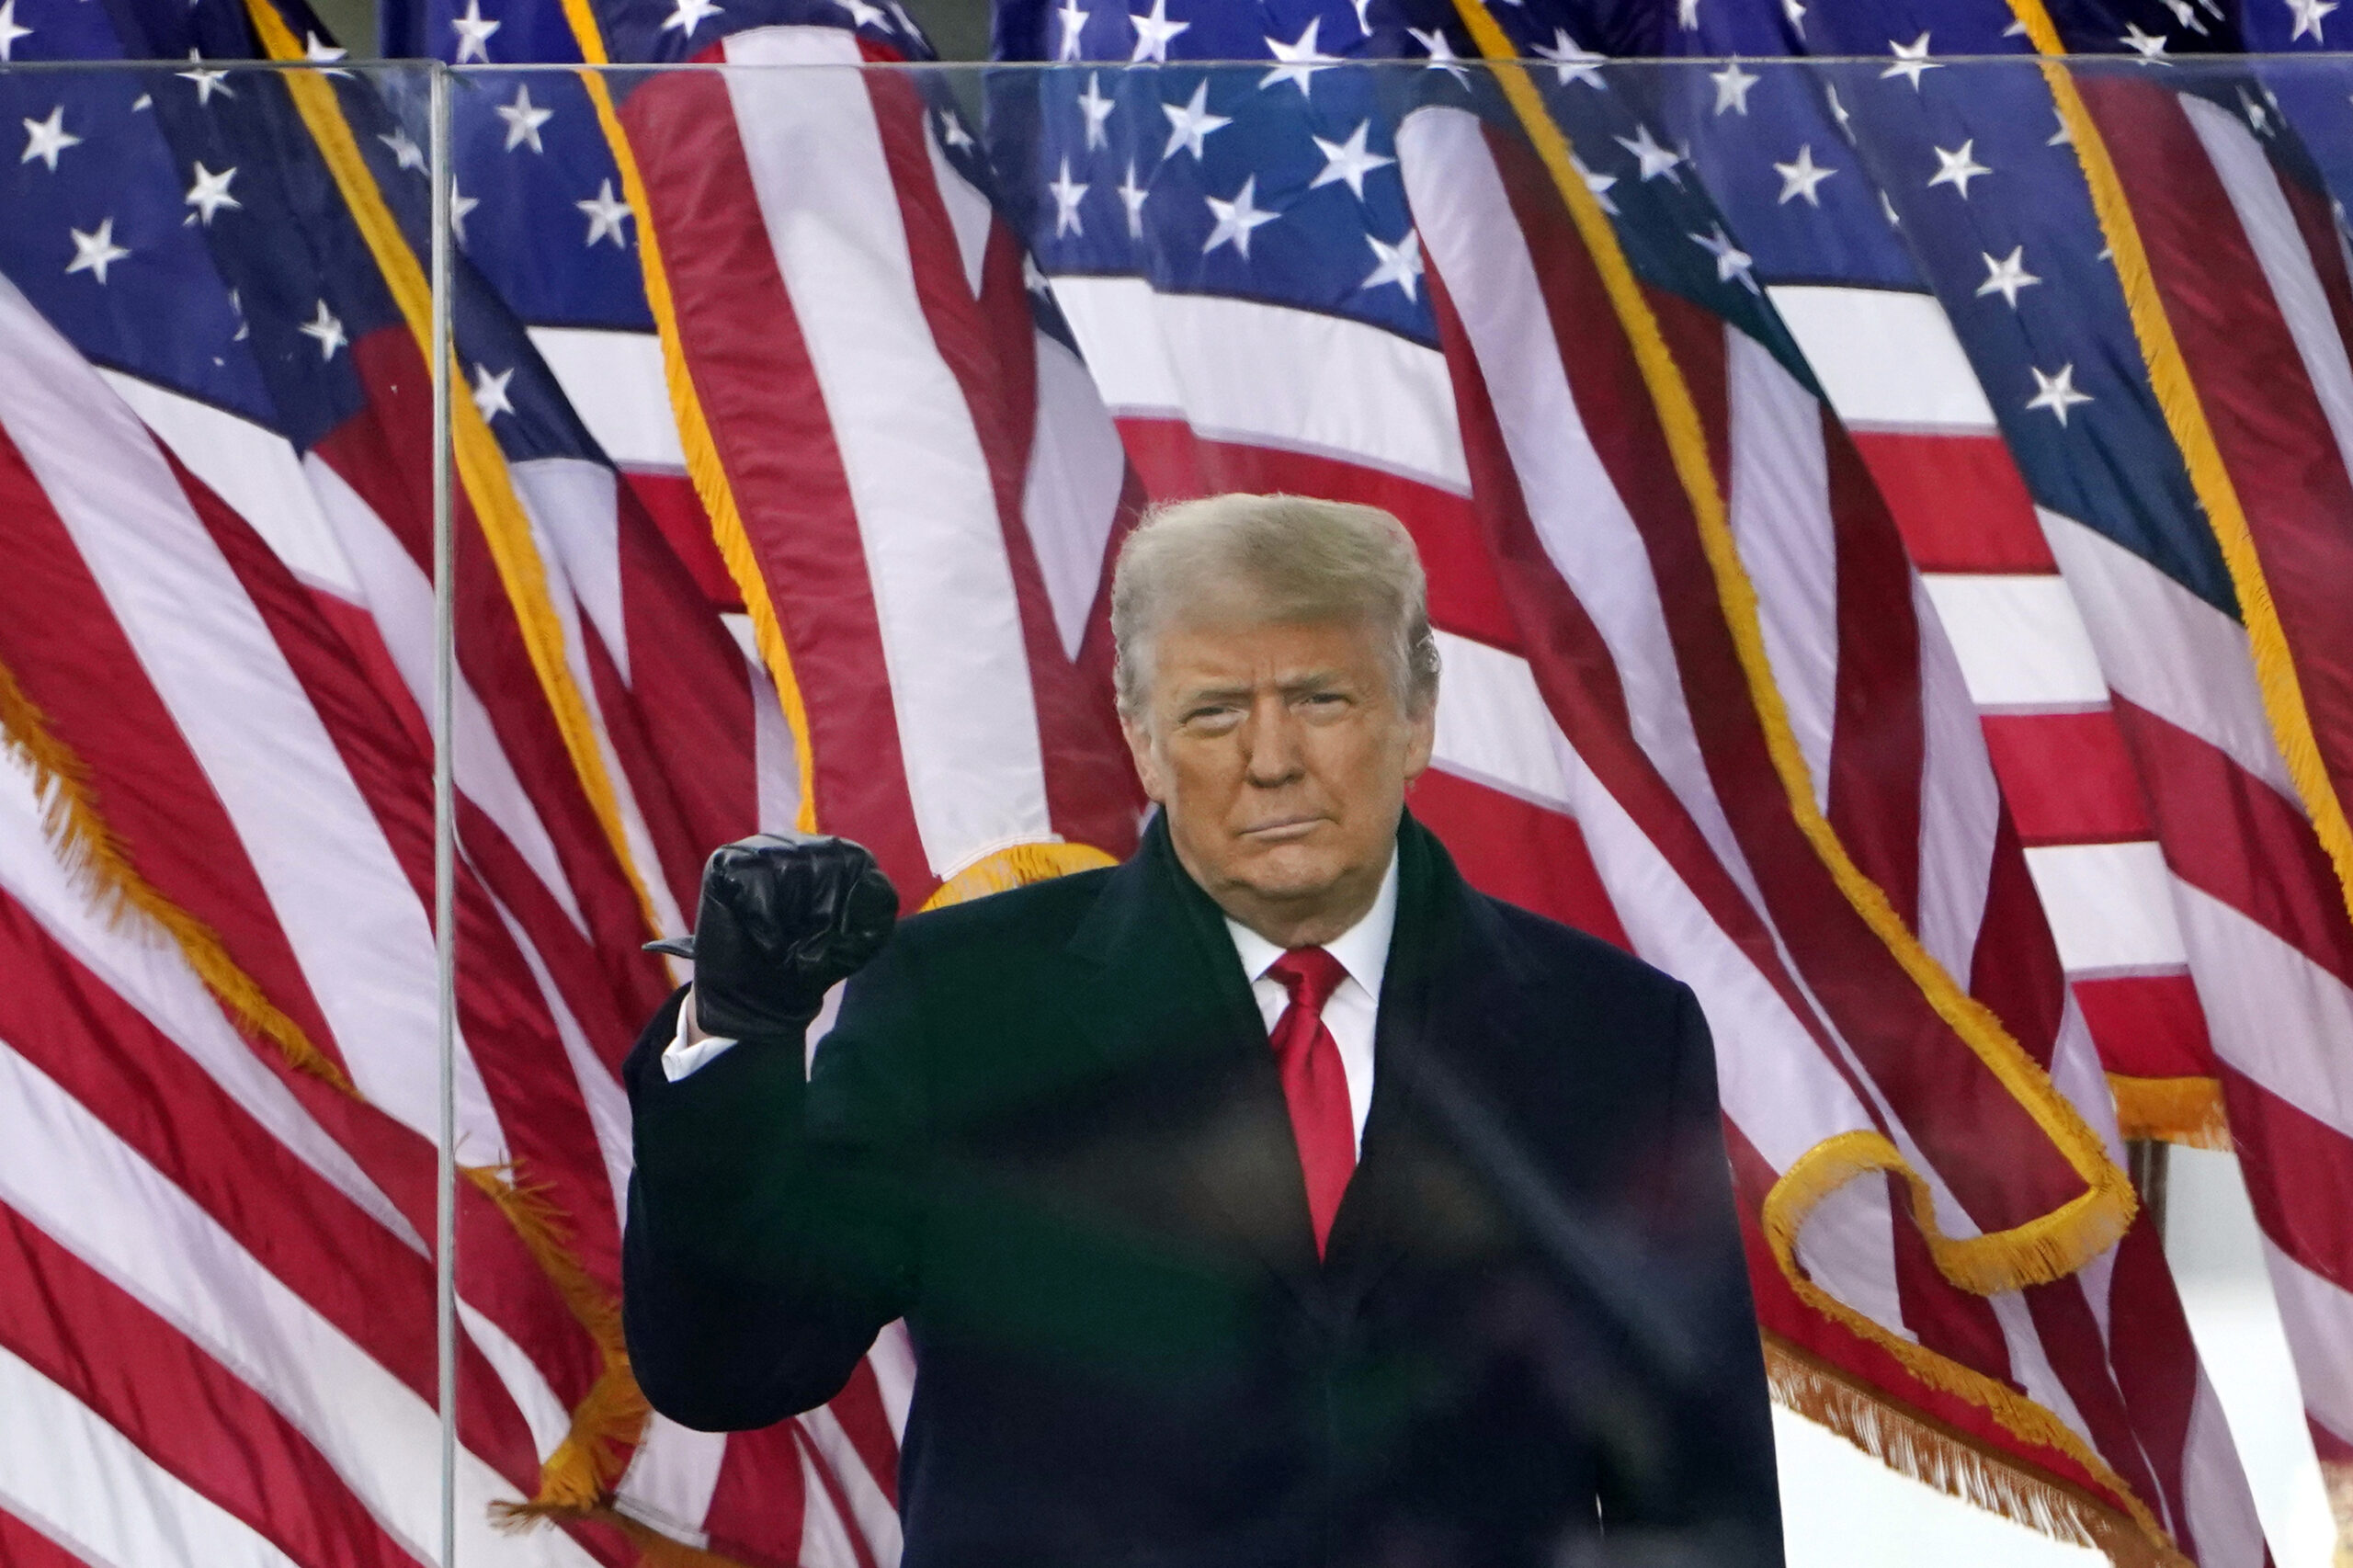 Donald Trump stands in front of multiple American flags, wearing a dark suit, white shirt, and red tie.